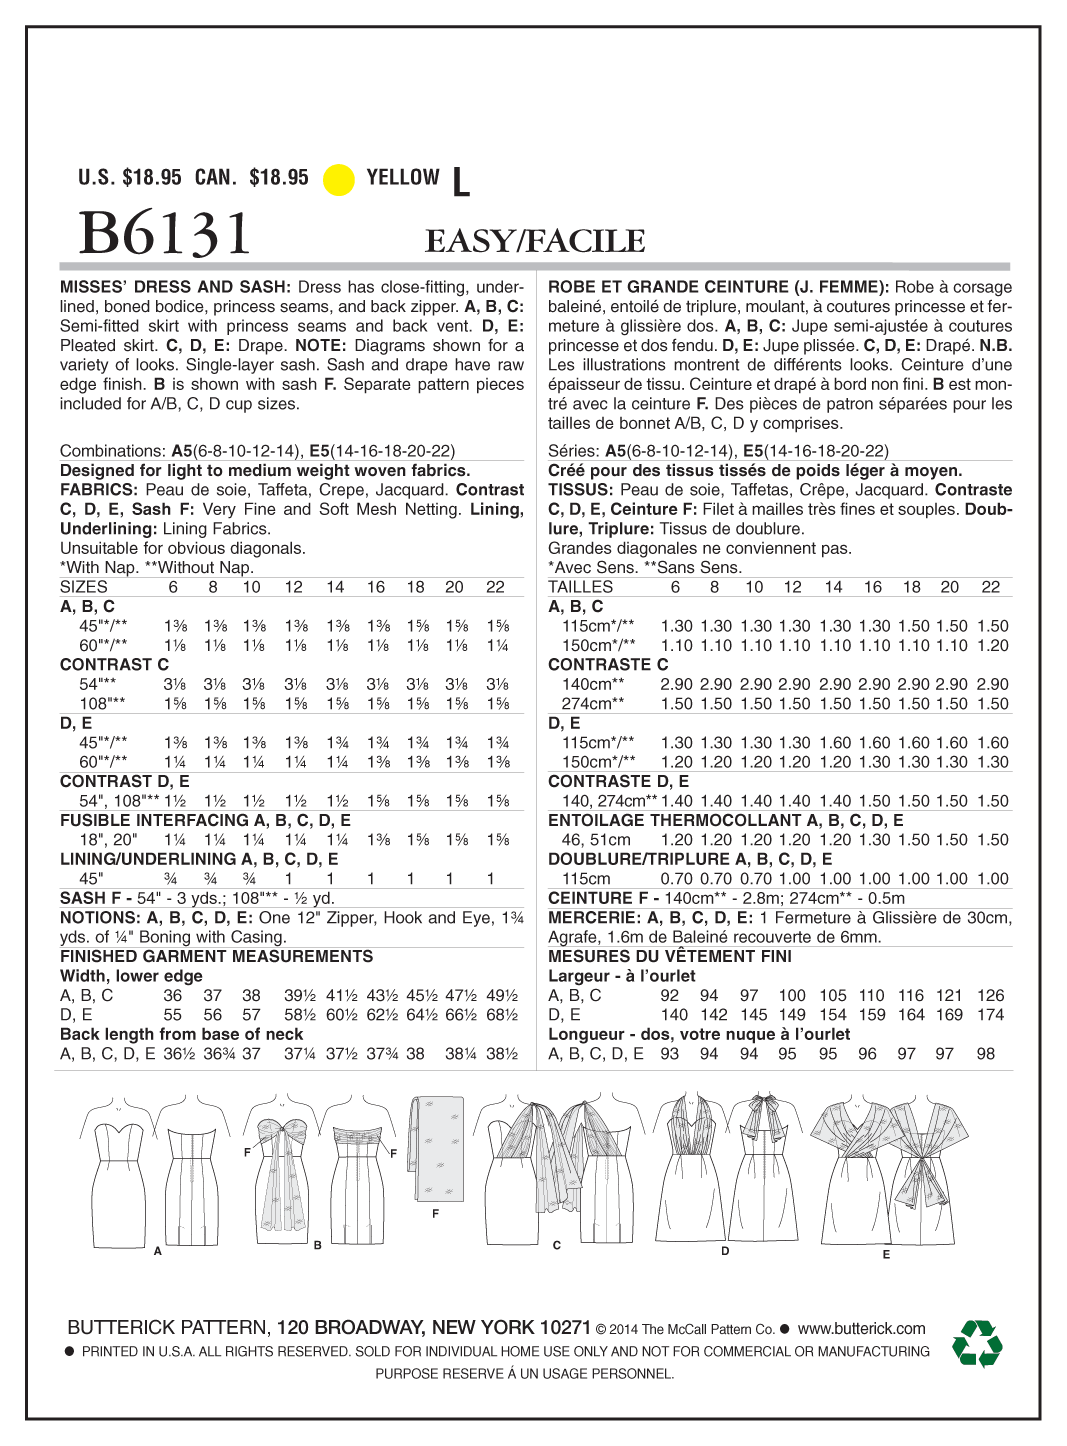 Butterick B6131 Misses' Dress and Sash